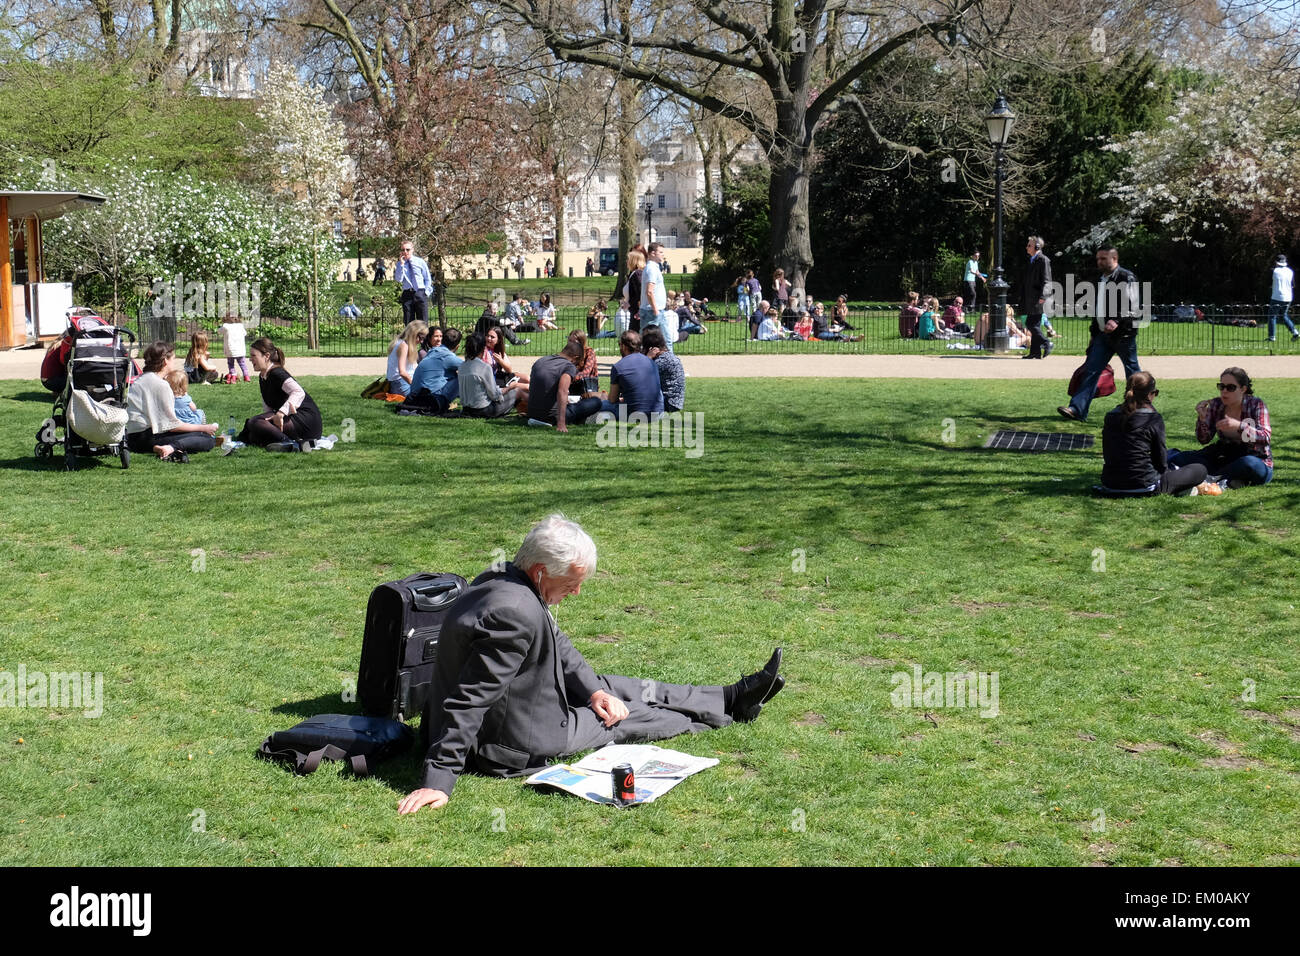 London, UK. 14th April, 2015. Man in suit reads newspaper in St.James's Park. Londoners and tourists enjoy the parks and public spaces as temperatures rise in Spring. Credit:  Eden Breitz/Alamy Live News Stock Photo